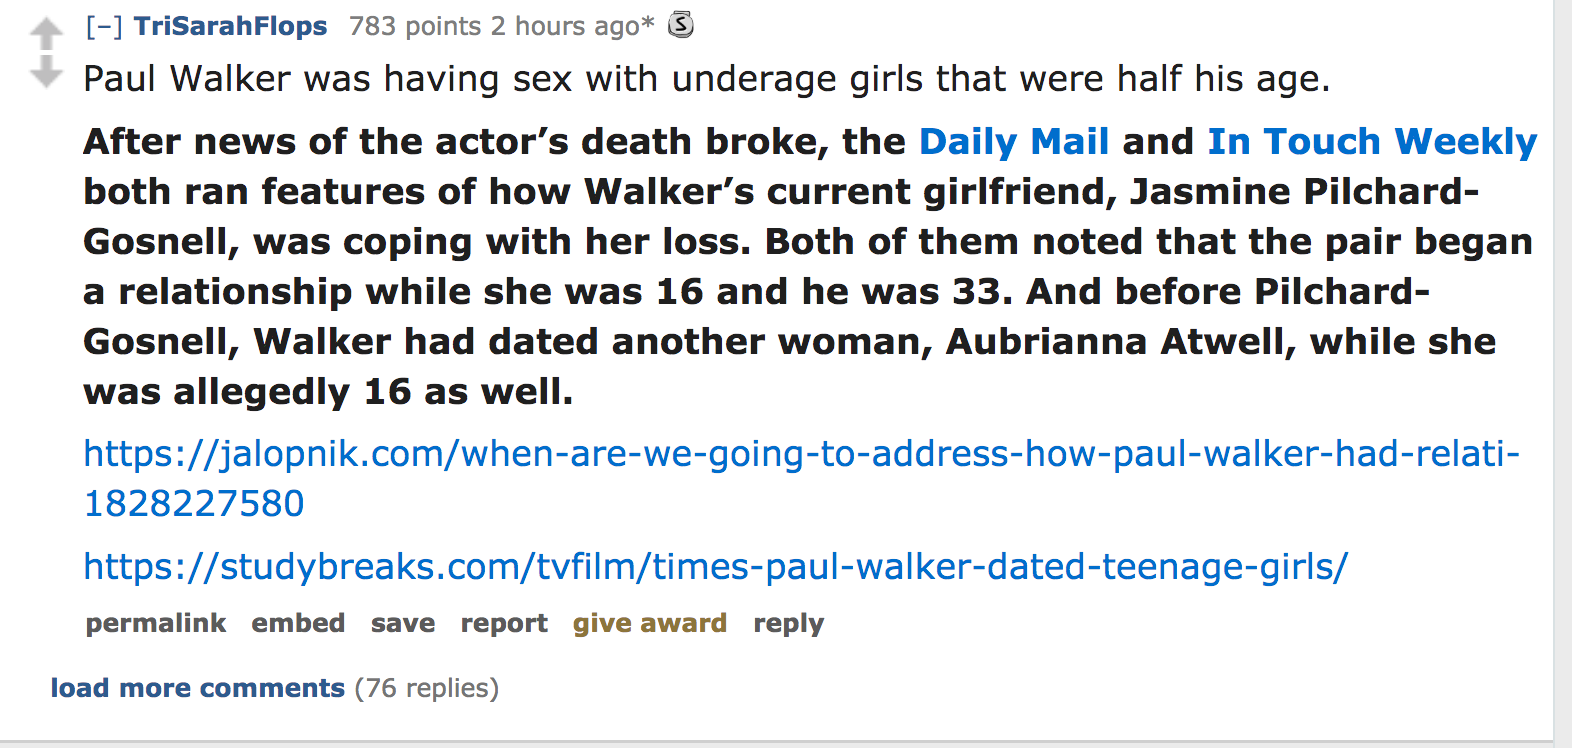 celebrity crimes - Paul Walker was having sex with underage girls that were half his age. After news of the actor's death broke, the Daily Mail and In Touch Weekly both ran features of how Walker's current girlfriend, Jasmine P